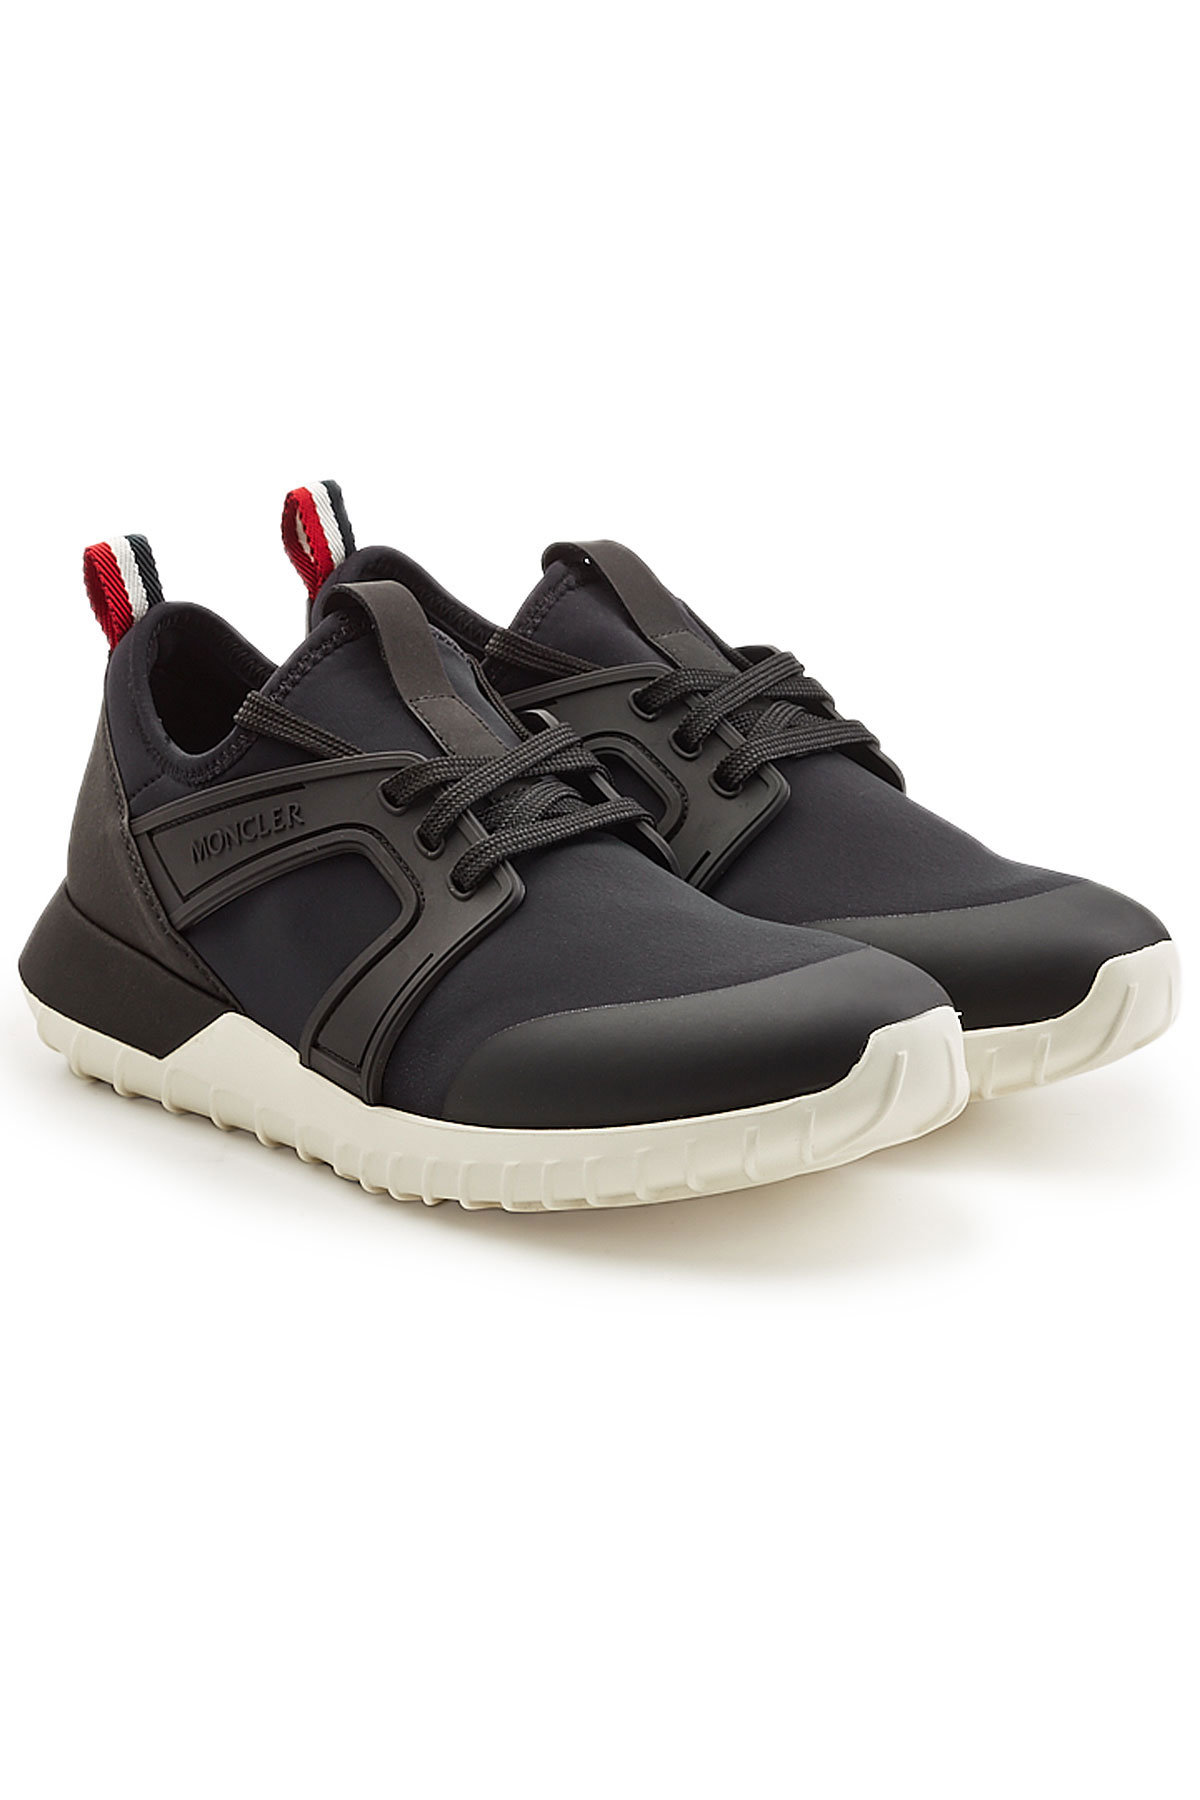 Moncler - Meline Sneakers with Leather